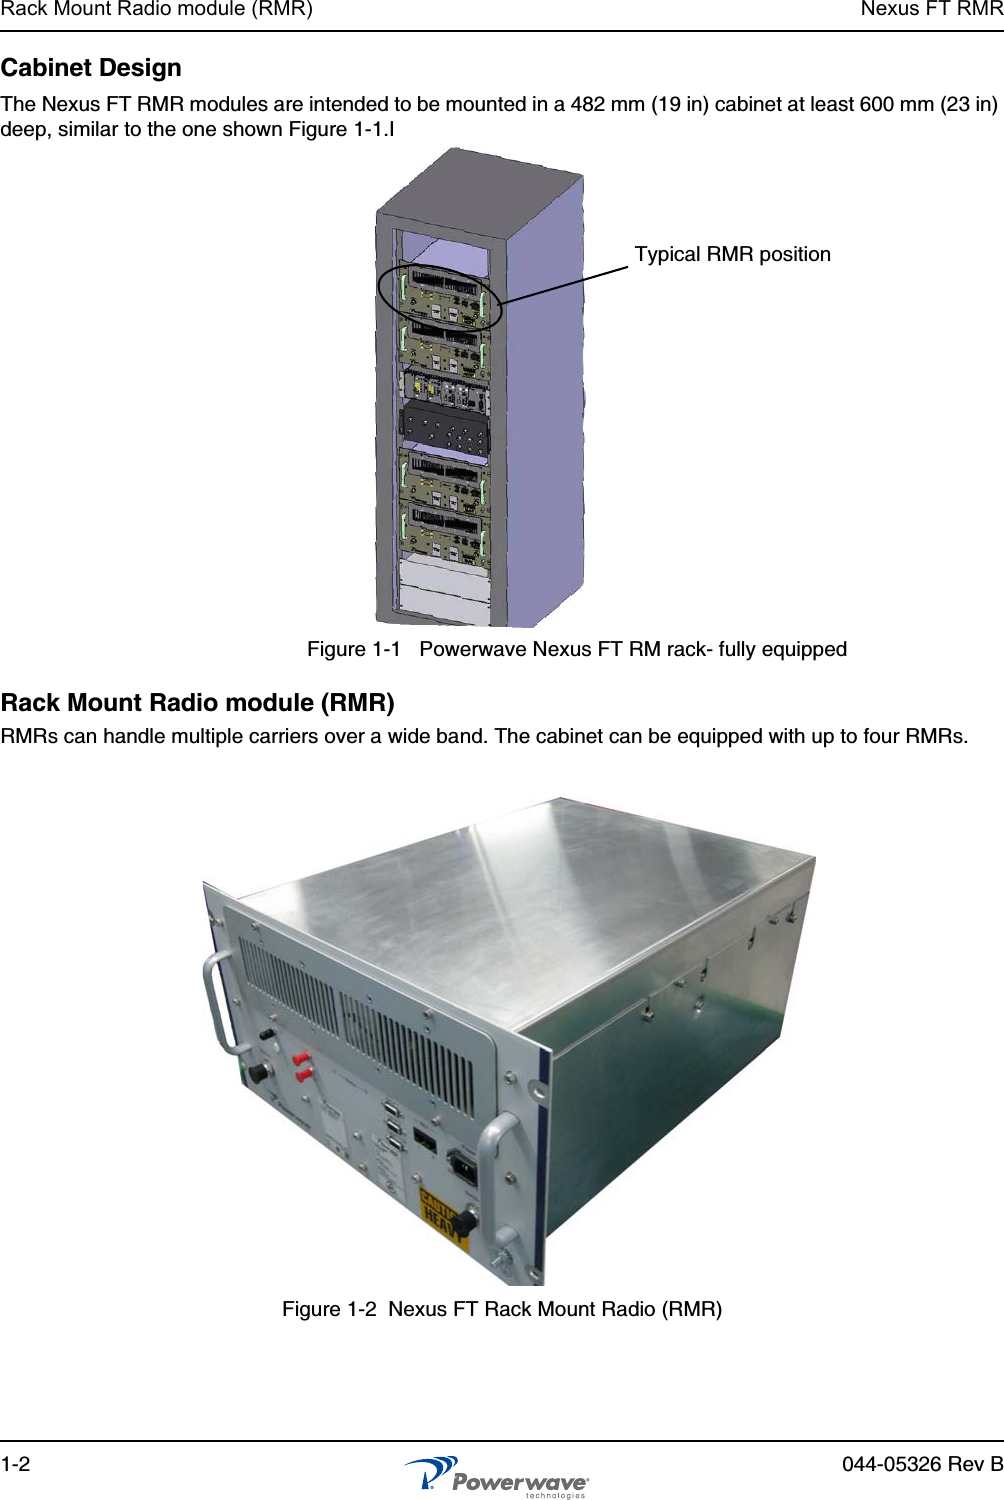 Rack Mount Radio module (RMR) Nexus FT RMR1-2 044-05326 Rev BCabinet DesignThe Nexus FT RMR modules are intended to be mounted in a 482 mm (19 in) cabinet at least 600 mm (23 in) deep, similar to the one shown Figure 1-1.IFigure 1-1   Powerwave Nexus FT RM rack- fully equippedRack Mount Radio module (RMR) RMRs can handle multiple carriers over a wide band. The cabinet can be equipped with up to four RMRs.Figure 1-2  Nexus FT Rack Mount Radio (RMR) Typical RMR position